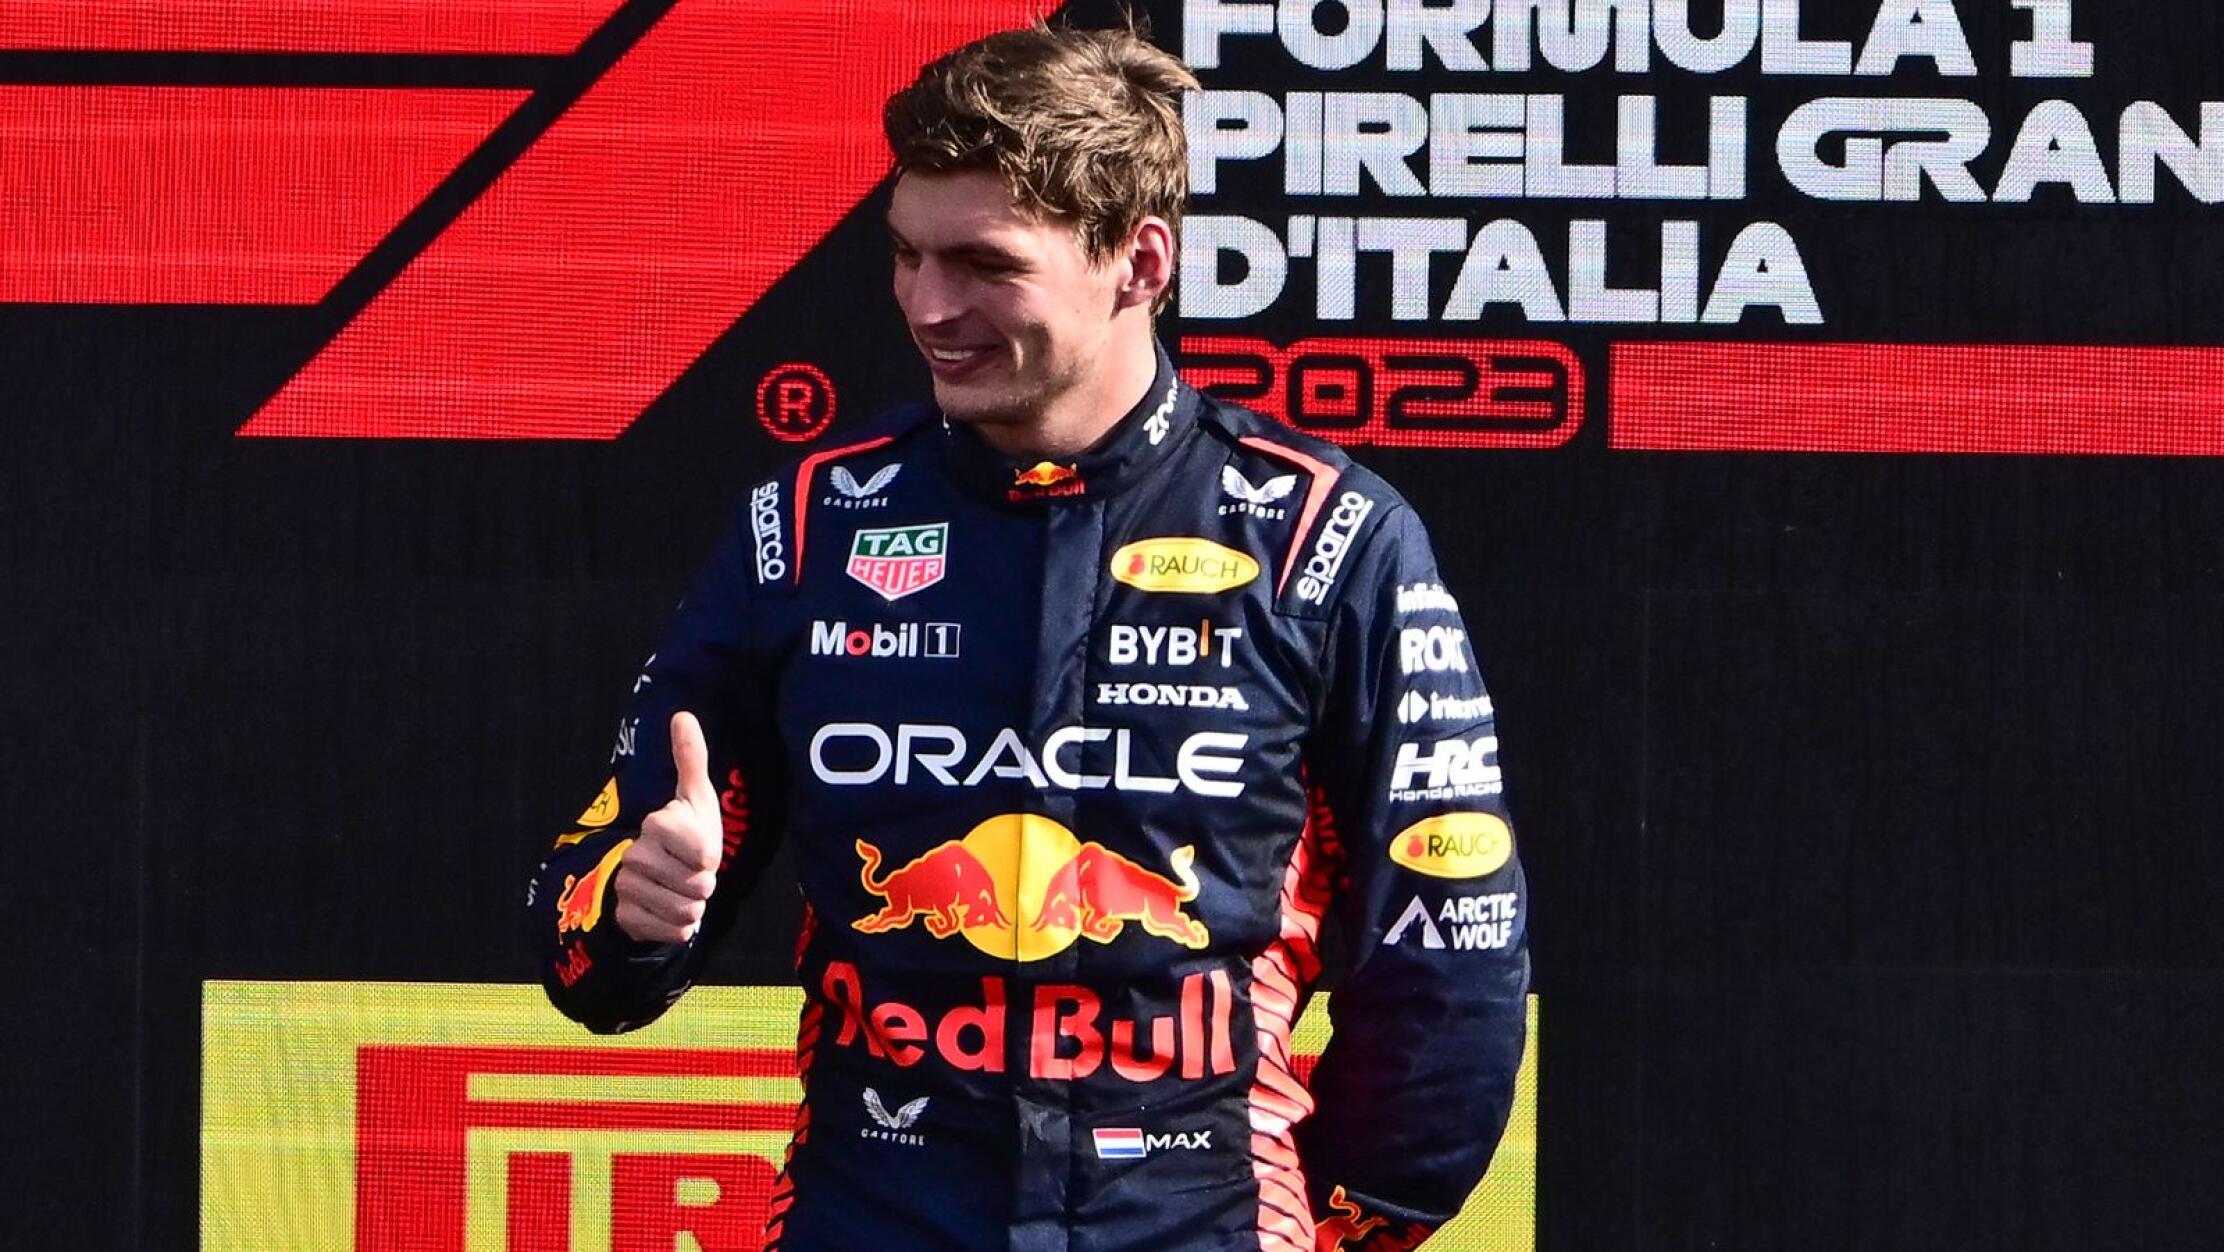 Red Bull Racing's Max Verstappen celebrates on the podium after winning Sunday’s Italian Formula One Grand Prix race at Autodromo Nazionale Monza circuit, in Monza